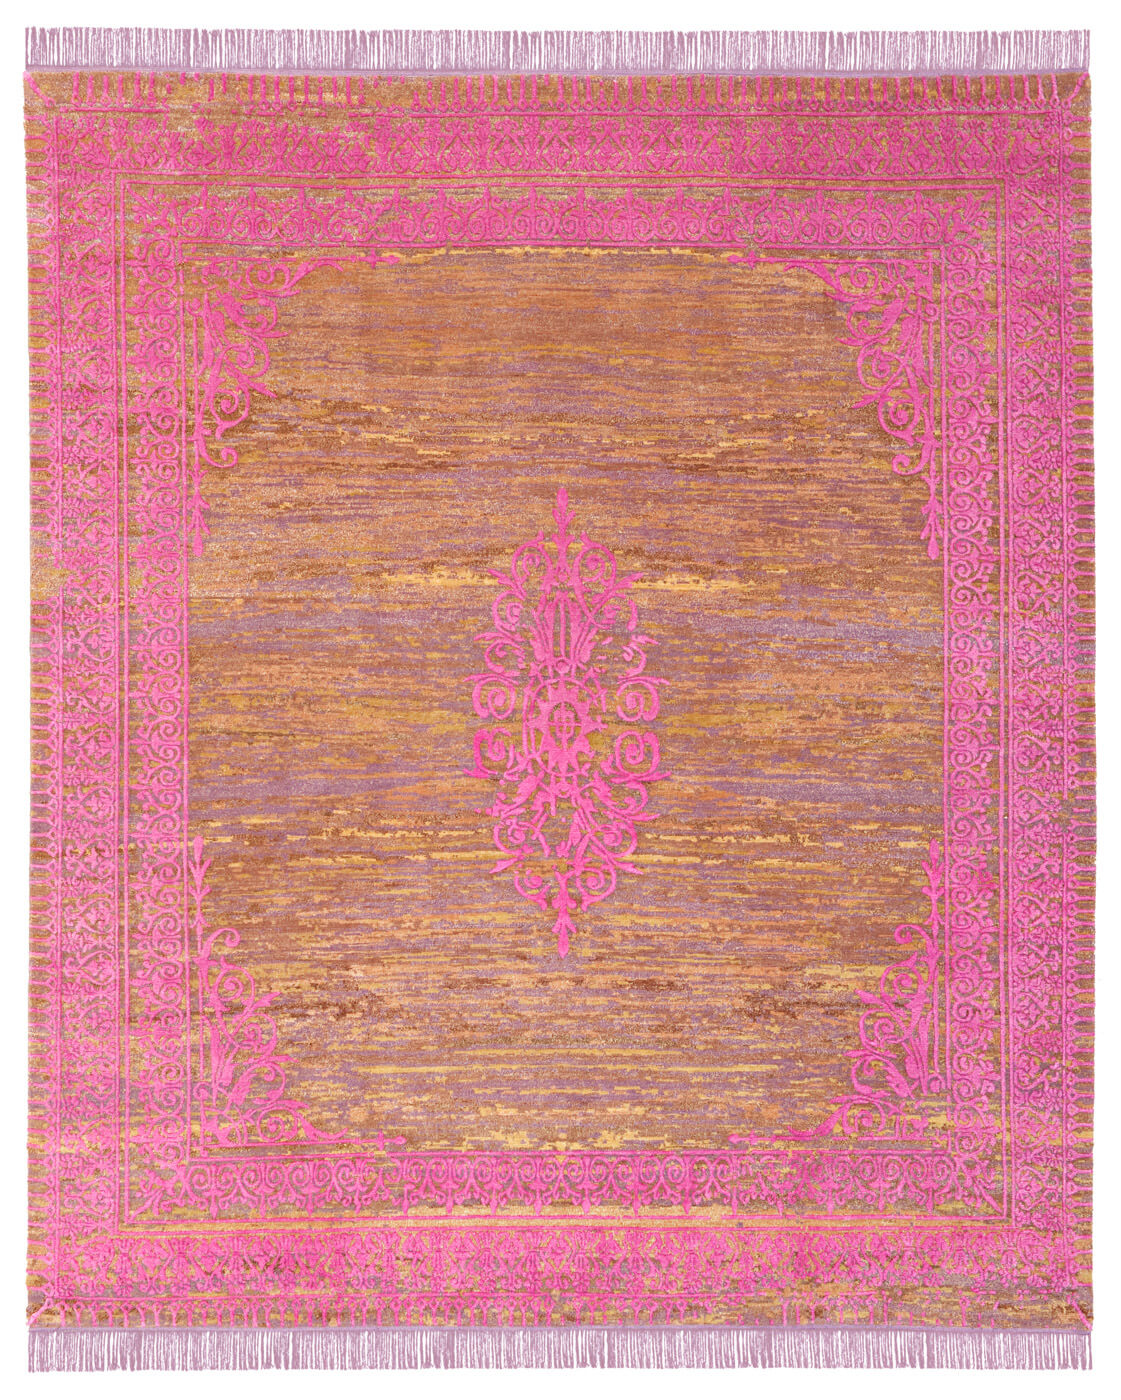 Hand-woven Vintage Style Pink Luxury Rug ☞ Size: 200 x 300 cm